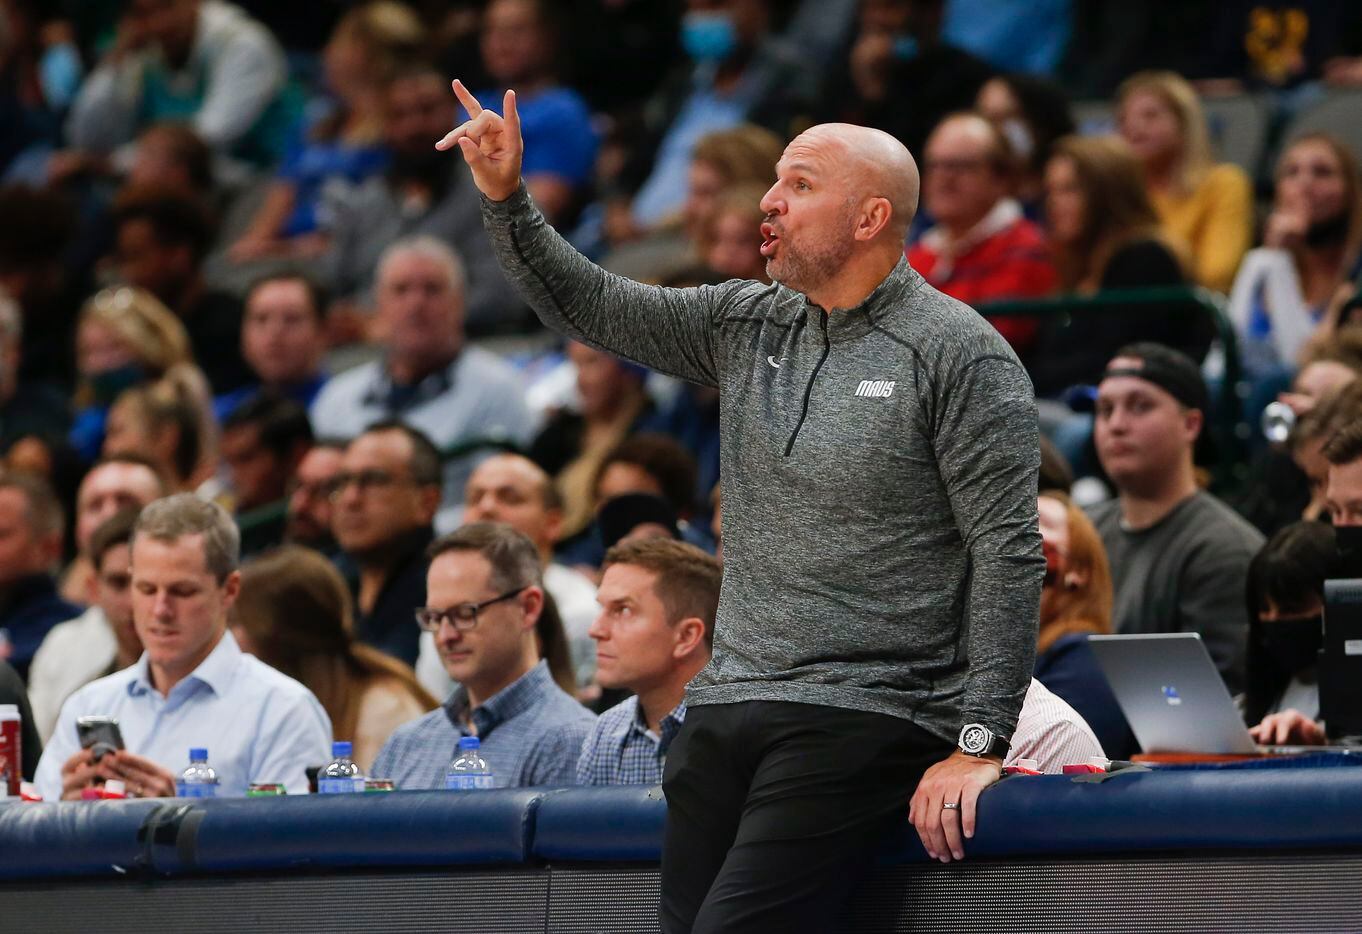 Dallas Mavericks head coach Jason Kidd signals his team during the second half of an NBA basketball game against the Charlotte Hornets in Dallas, Monday, December 13, 2021. Dallas won 120-96. (Brandon Wade/Special Contributor)